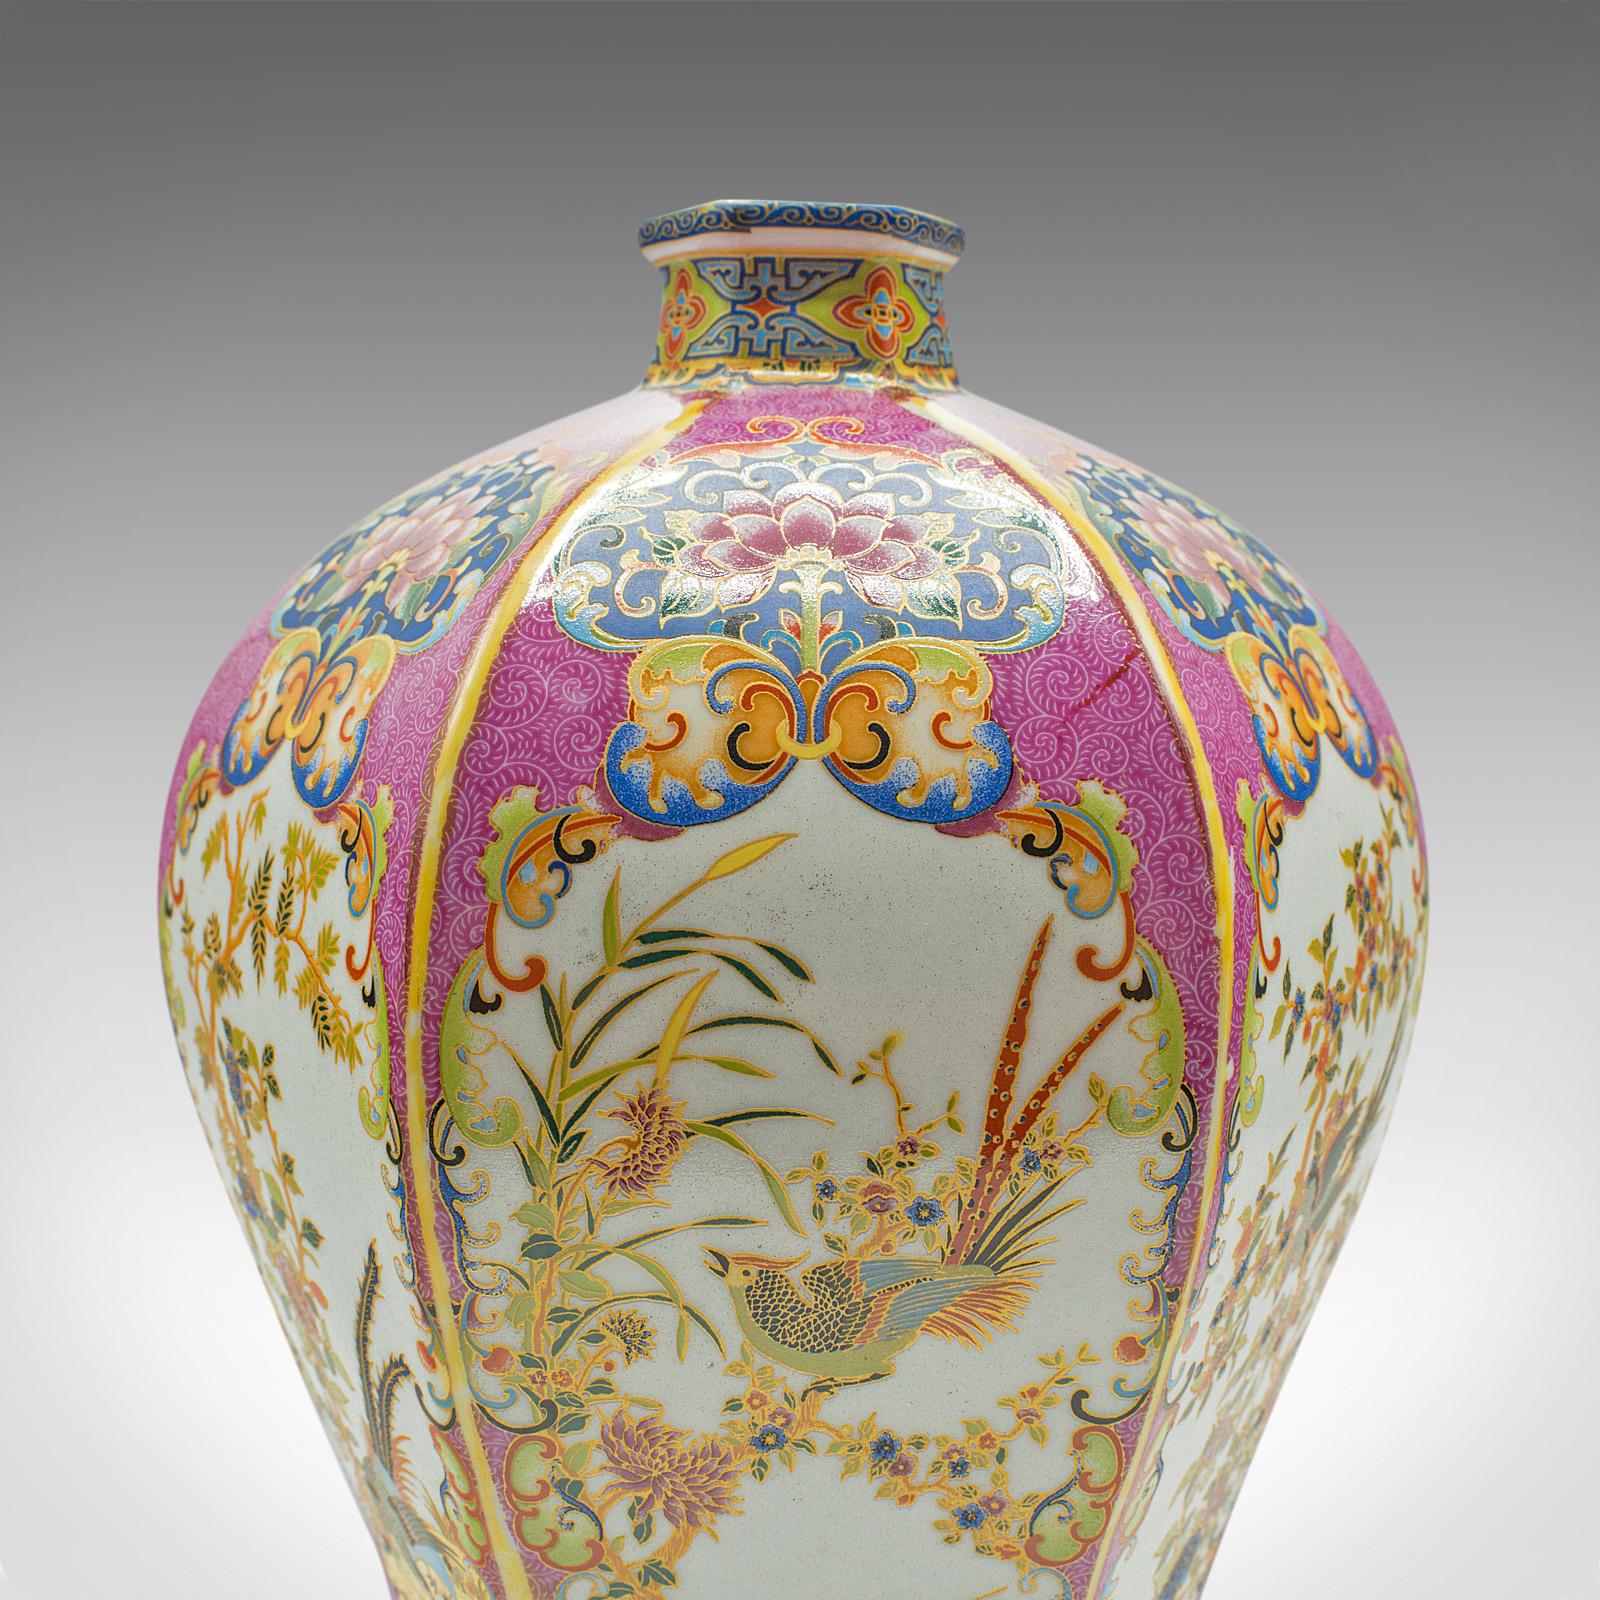 Antique Hexagonal Posy Vase, Chinese, Ceramic, Baluster Urn, Victorian, Qing For Sale 2